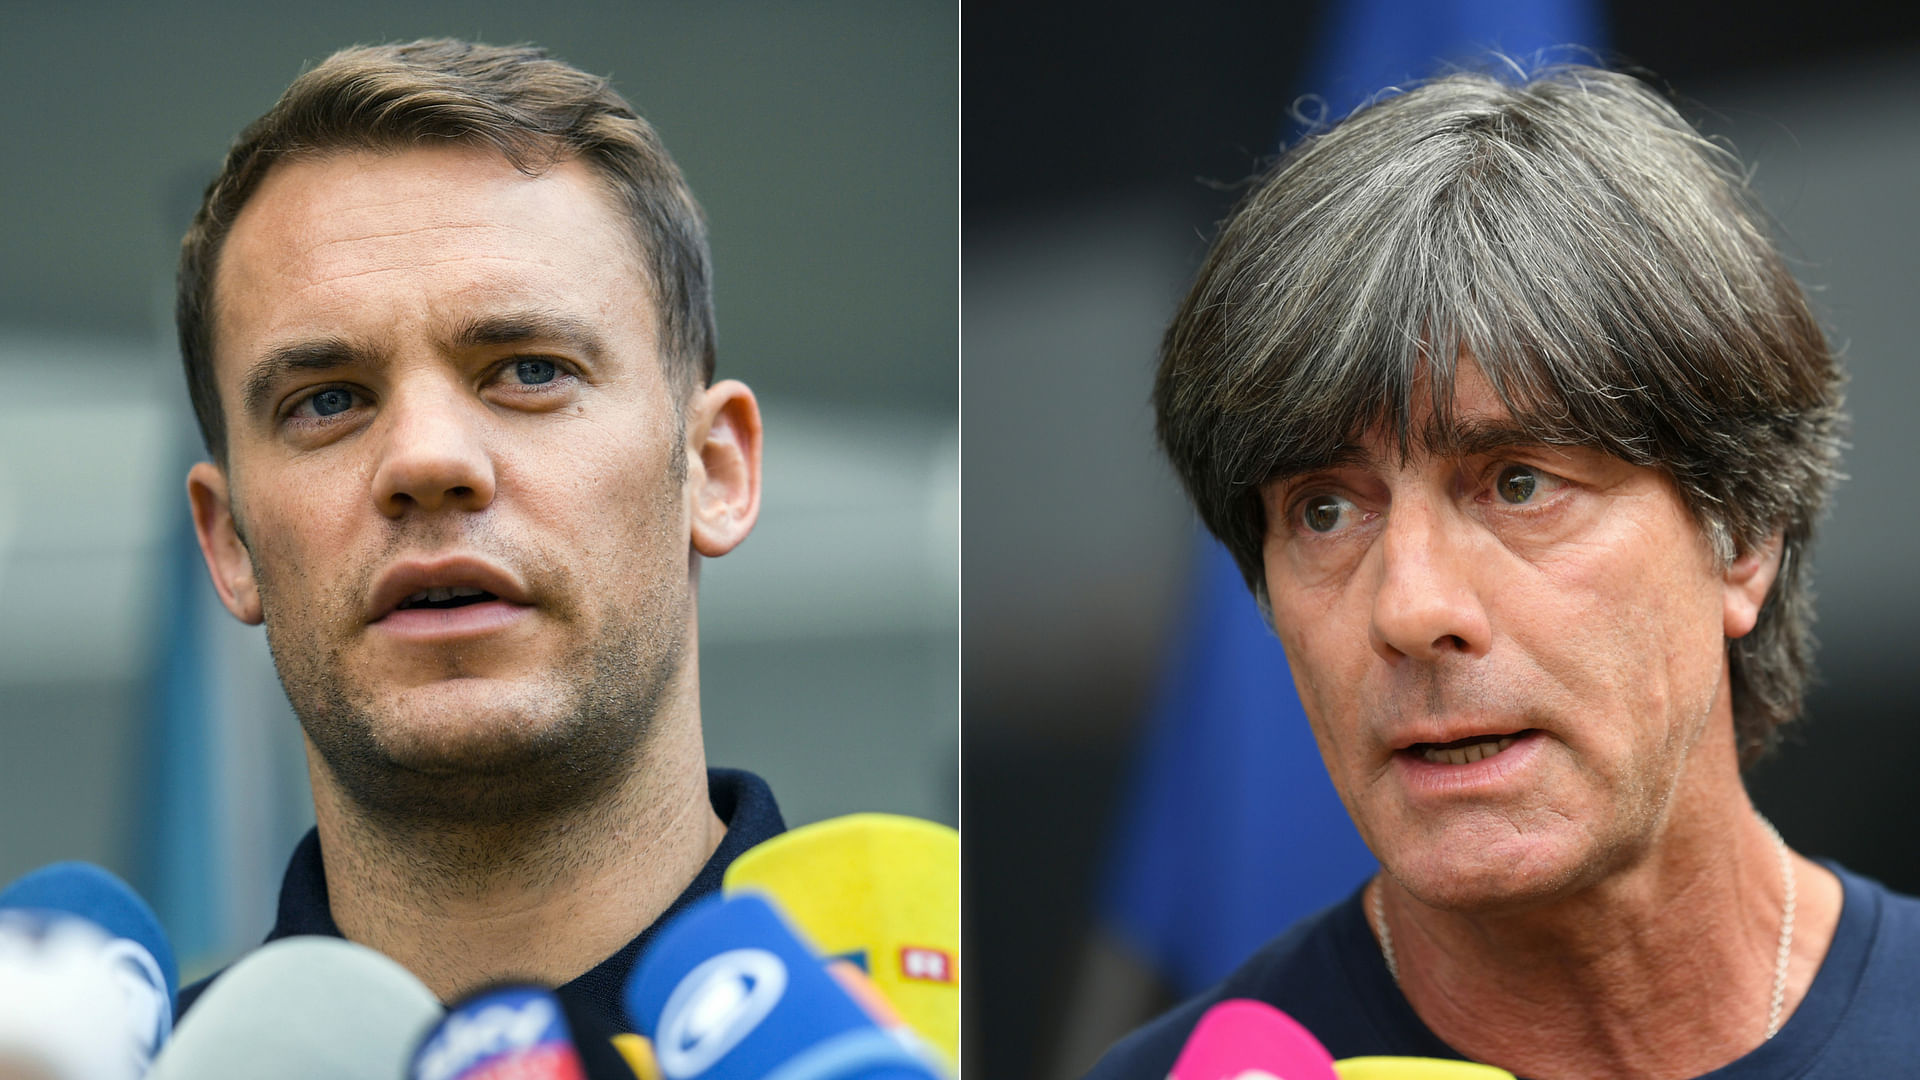 Germany captain and coach speak to the media after their exit from the World Cup.